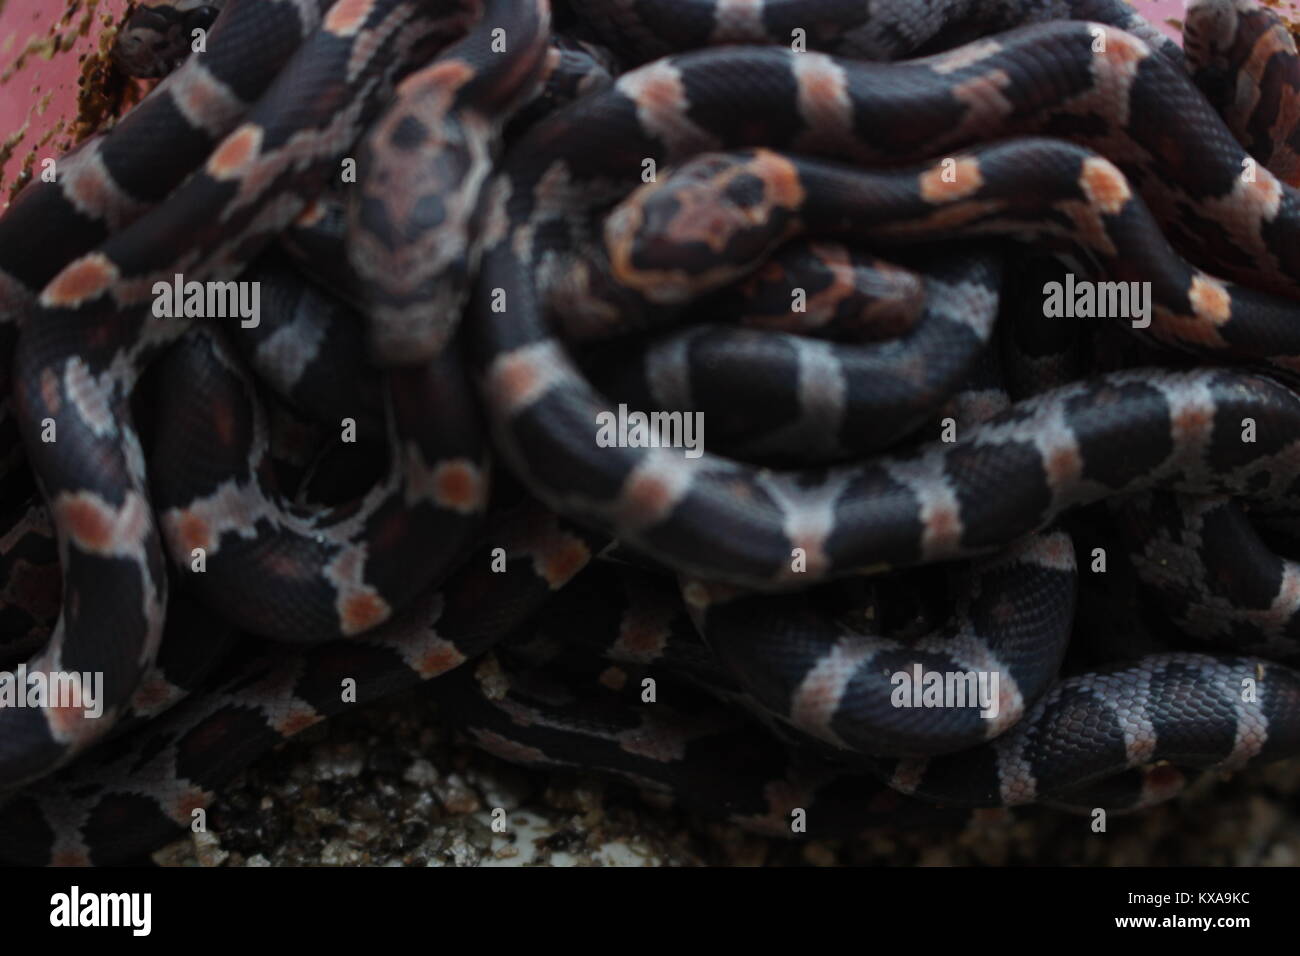 A ball of recently hatched baby corn snakes (Pantherophis guttatus). Corn snakes are some of the most popular pet snakes in Western countries today. Stock Photo